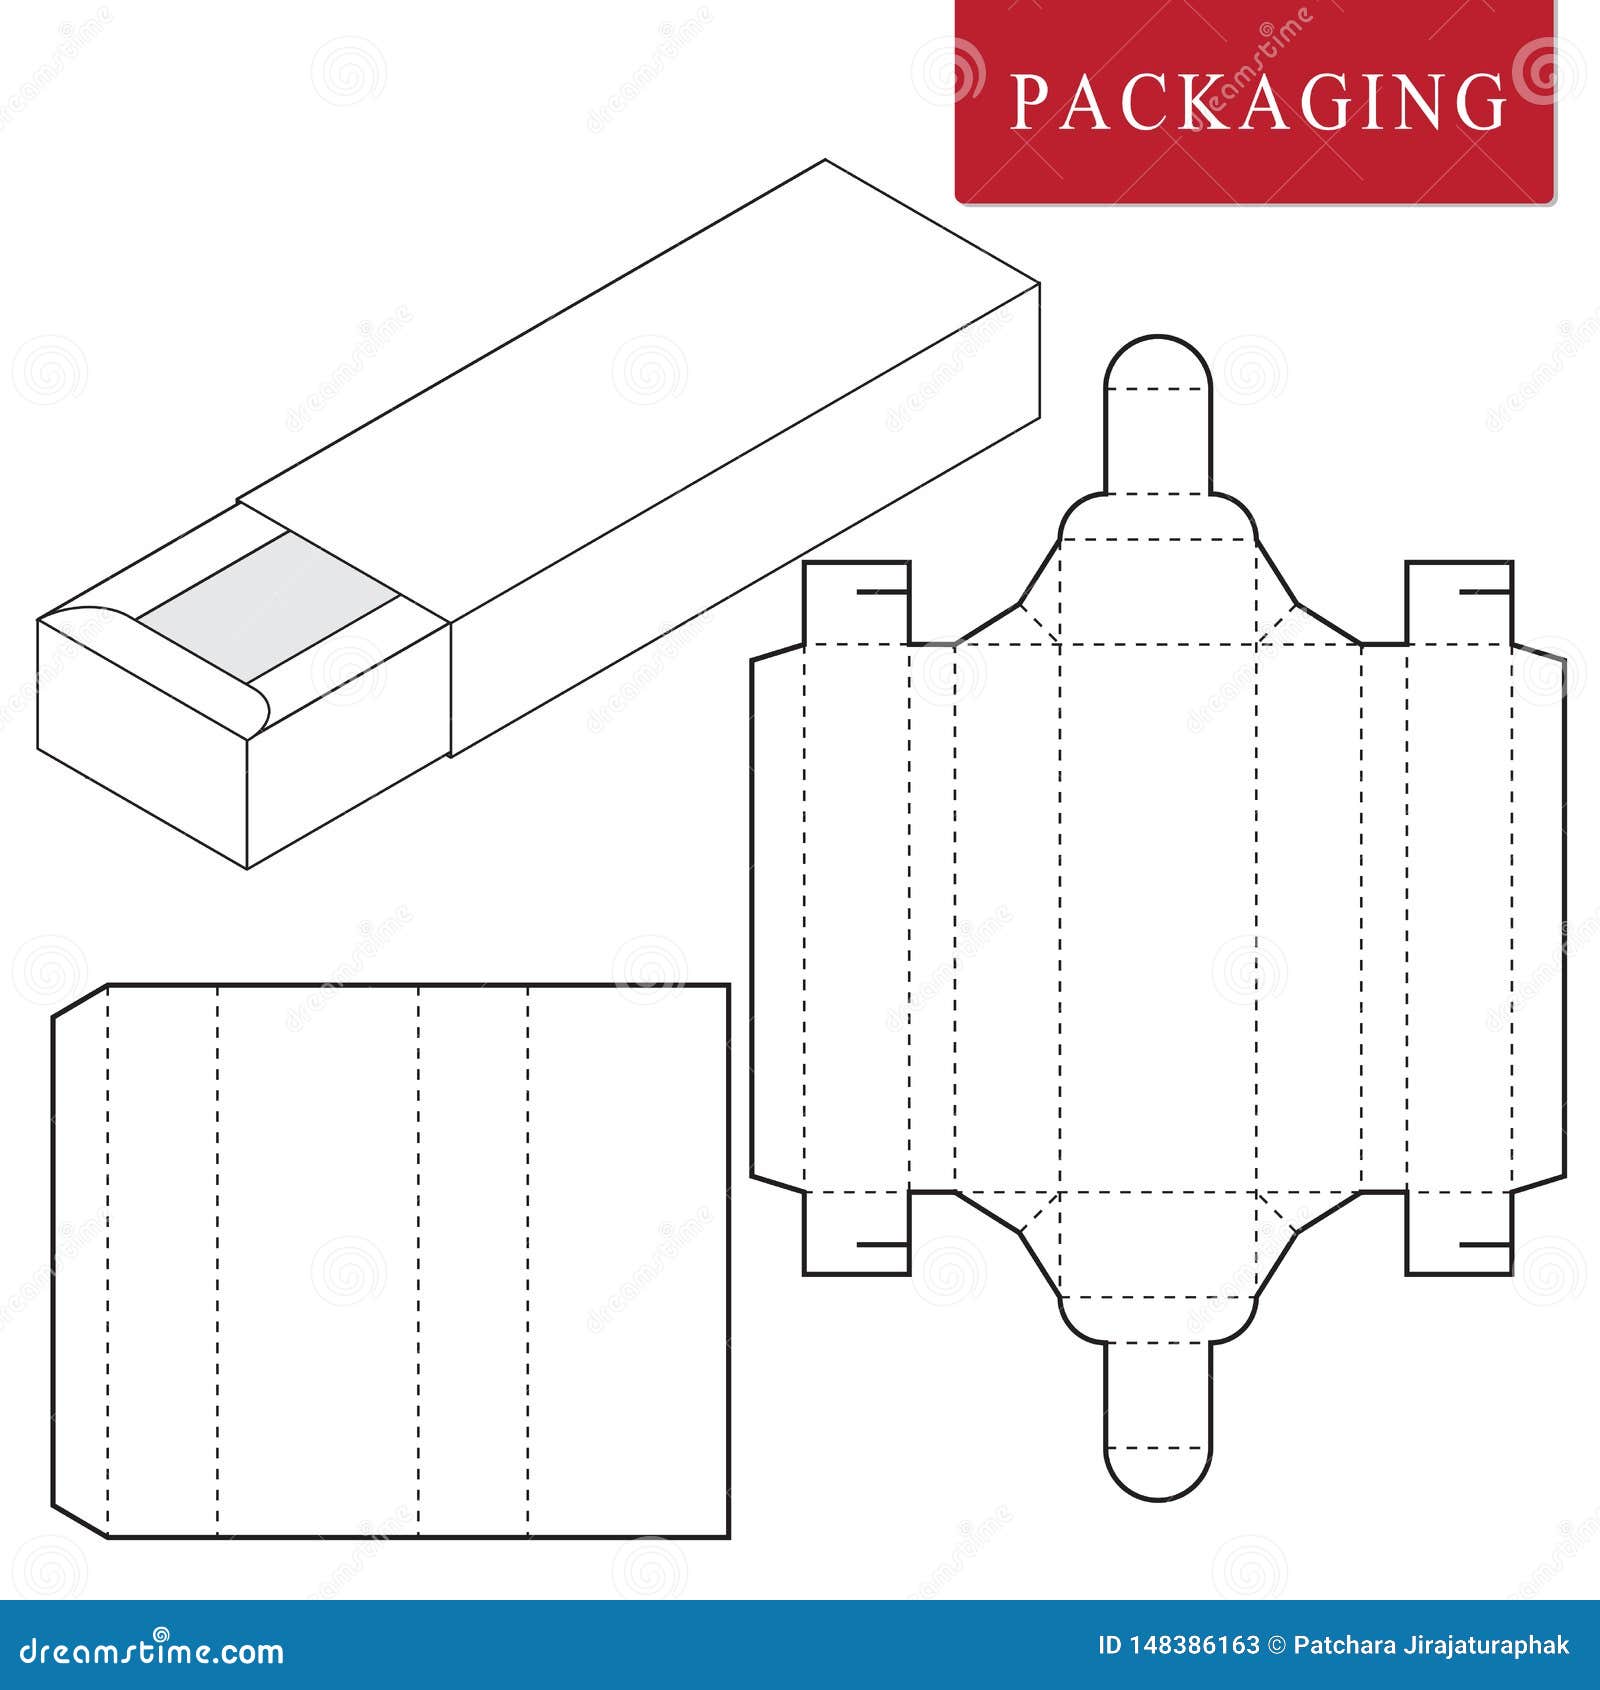 Packaging Design.Vector Illustration of Box.Package Template. Isolated ...